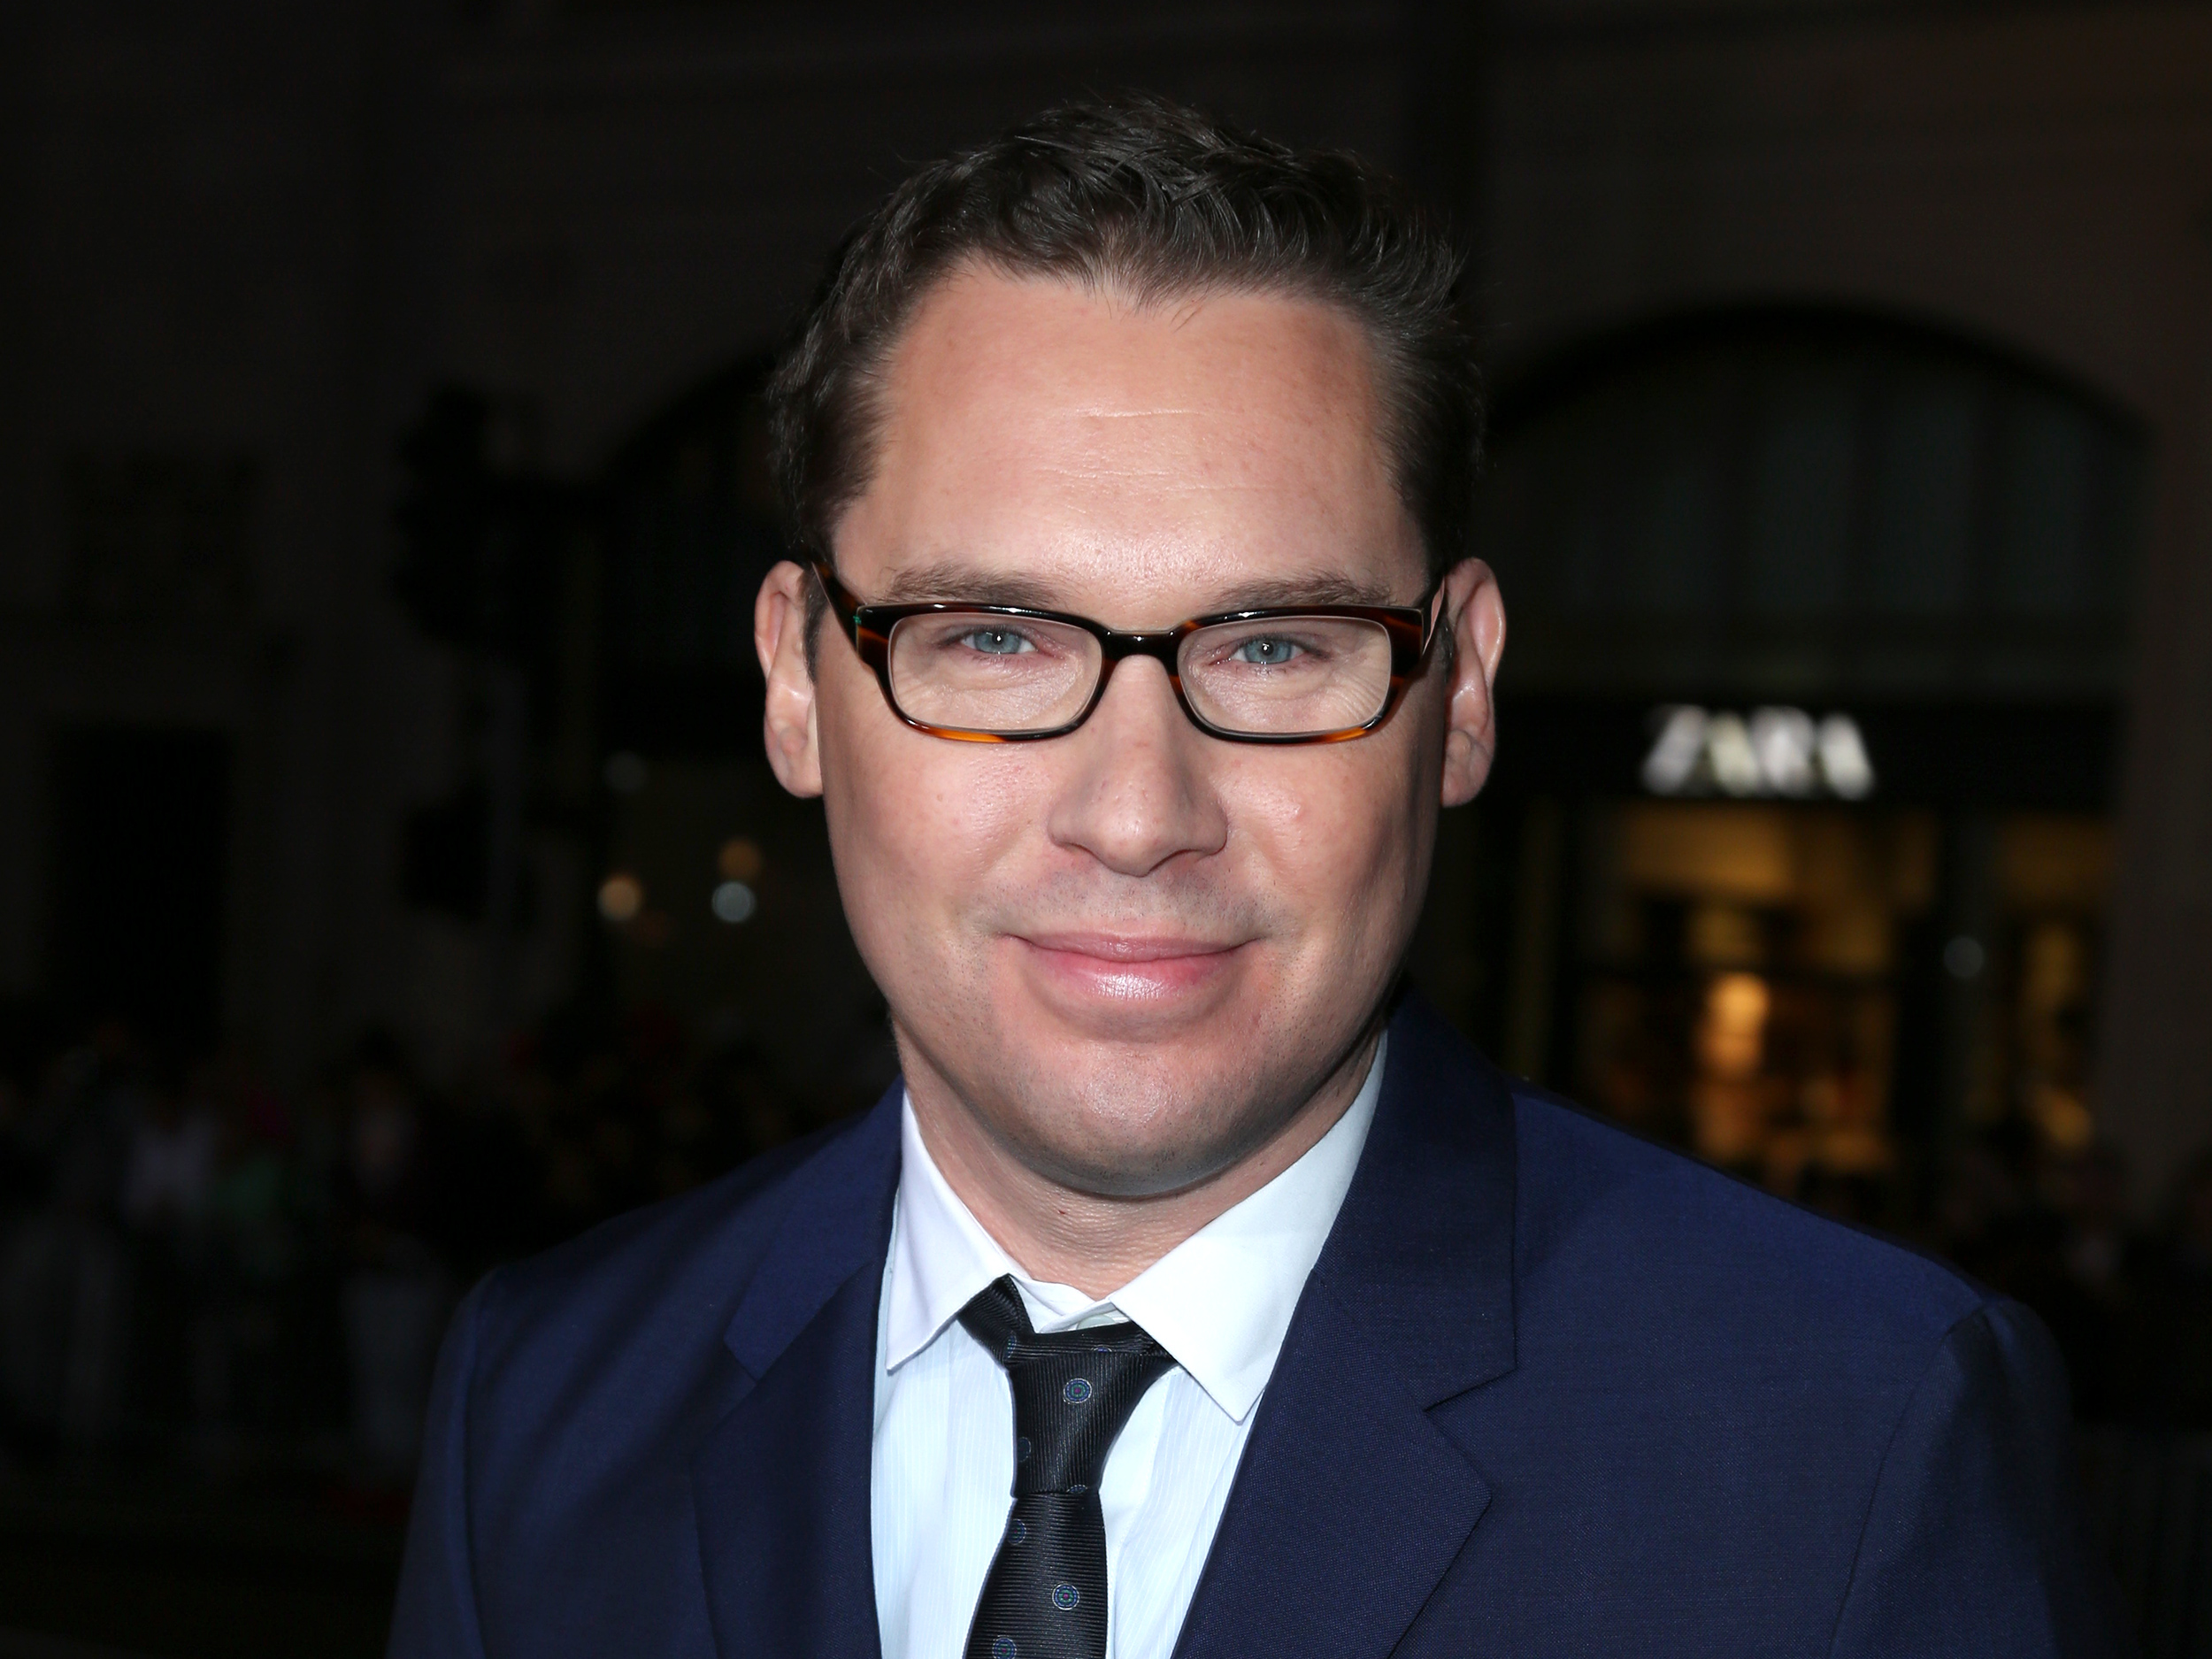 Director Bryan Singer arrives as New Line Cinema in association with Legendary Pictures presents the Los Angeles Premiere of "Jack The Giant Slayer" at The TCL Chinese Theater in Los Angeles, CA on Tuesday, February 26, 2013 (Alex J. Berliner/ABImages) via AP Images